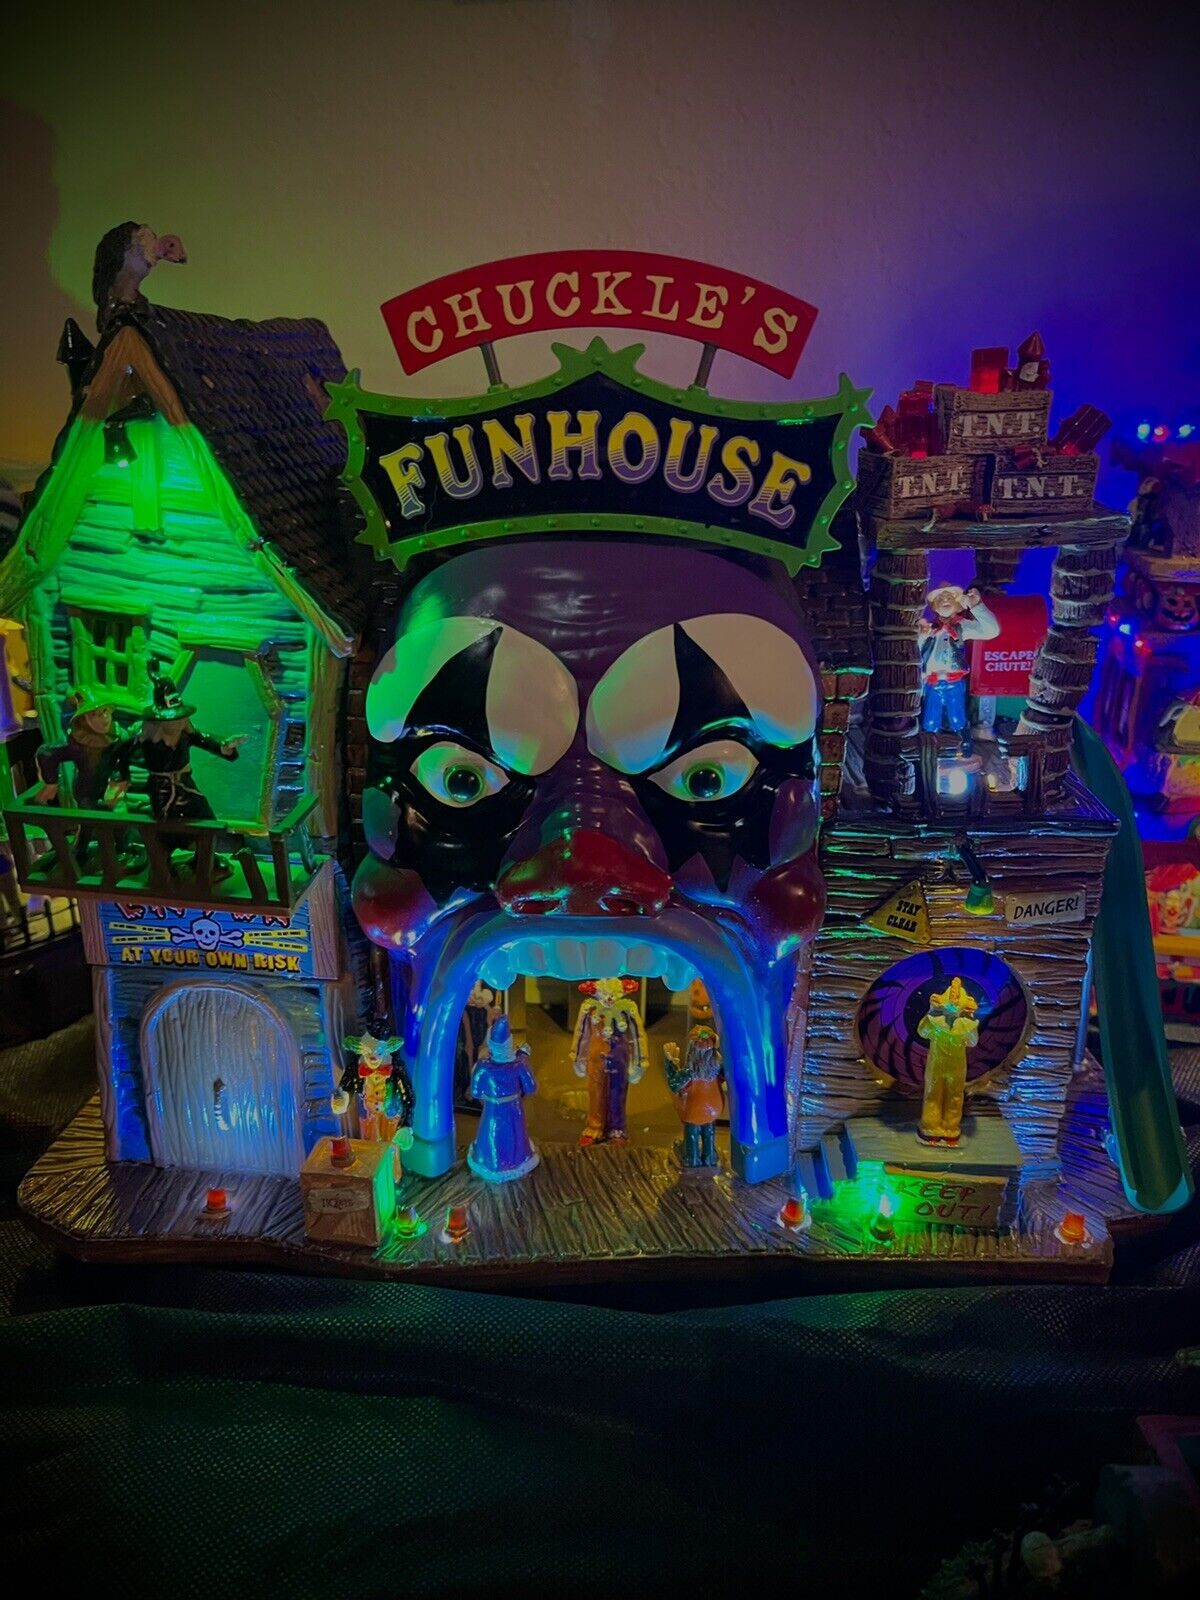 Chuckle's Funhouse - 2013 Lemax Spooky Town - BRAND NEW - Retired - Gorgeous